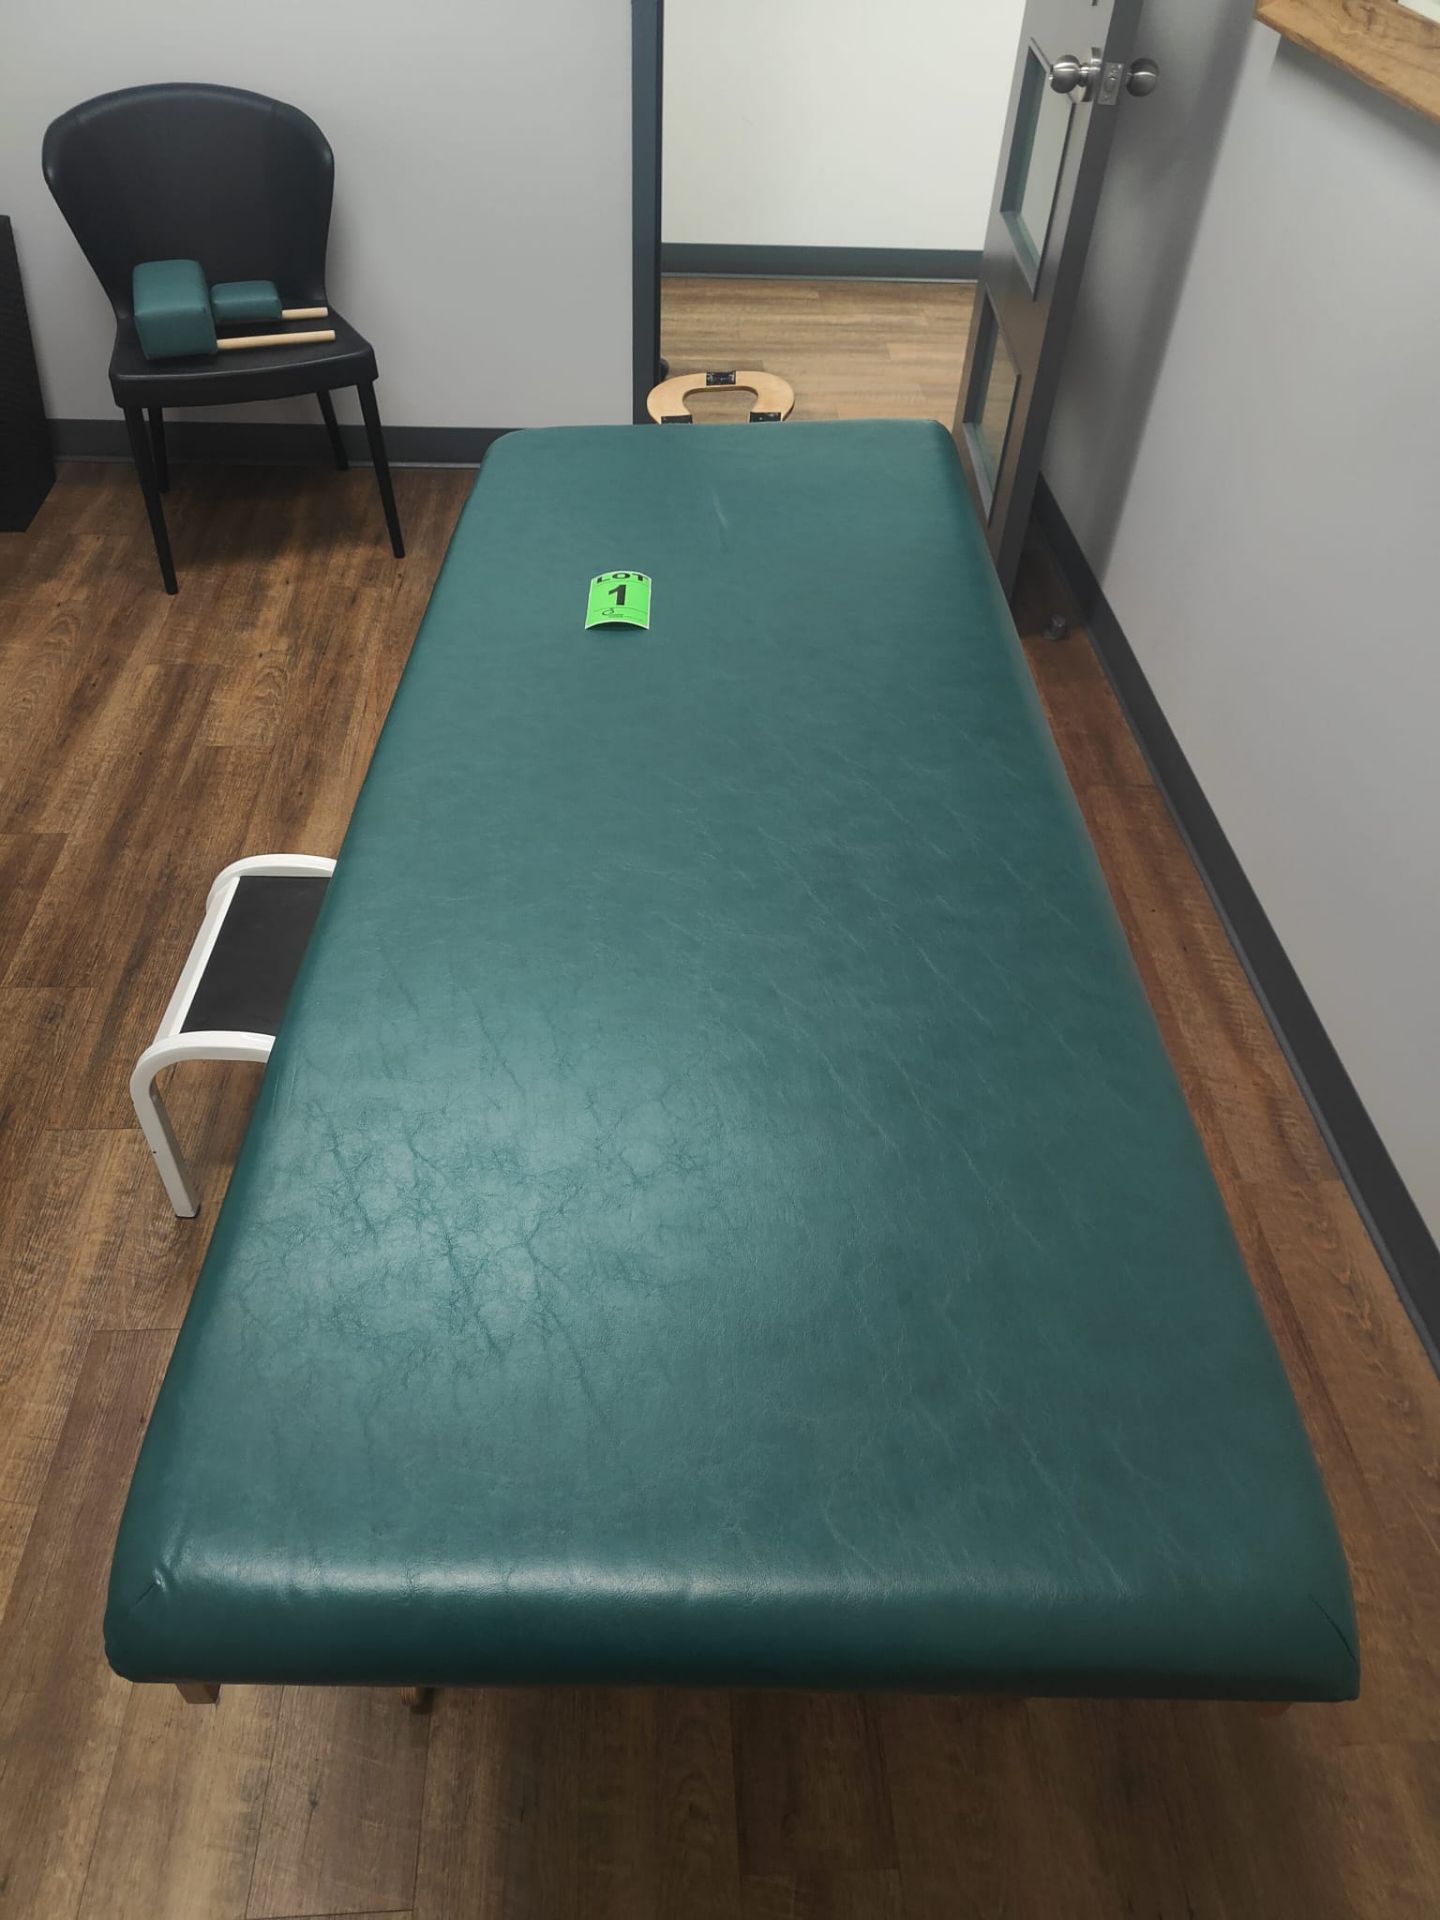 Massage Bed and Table with Stool - Image 2 of 3